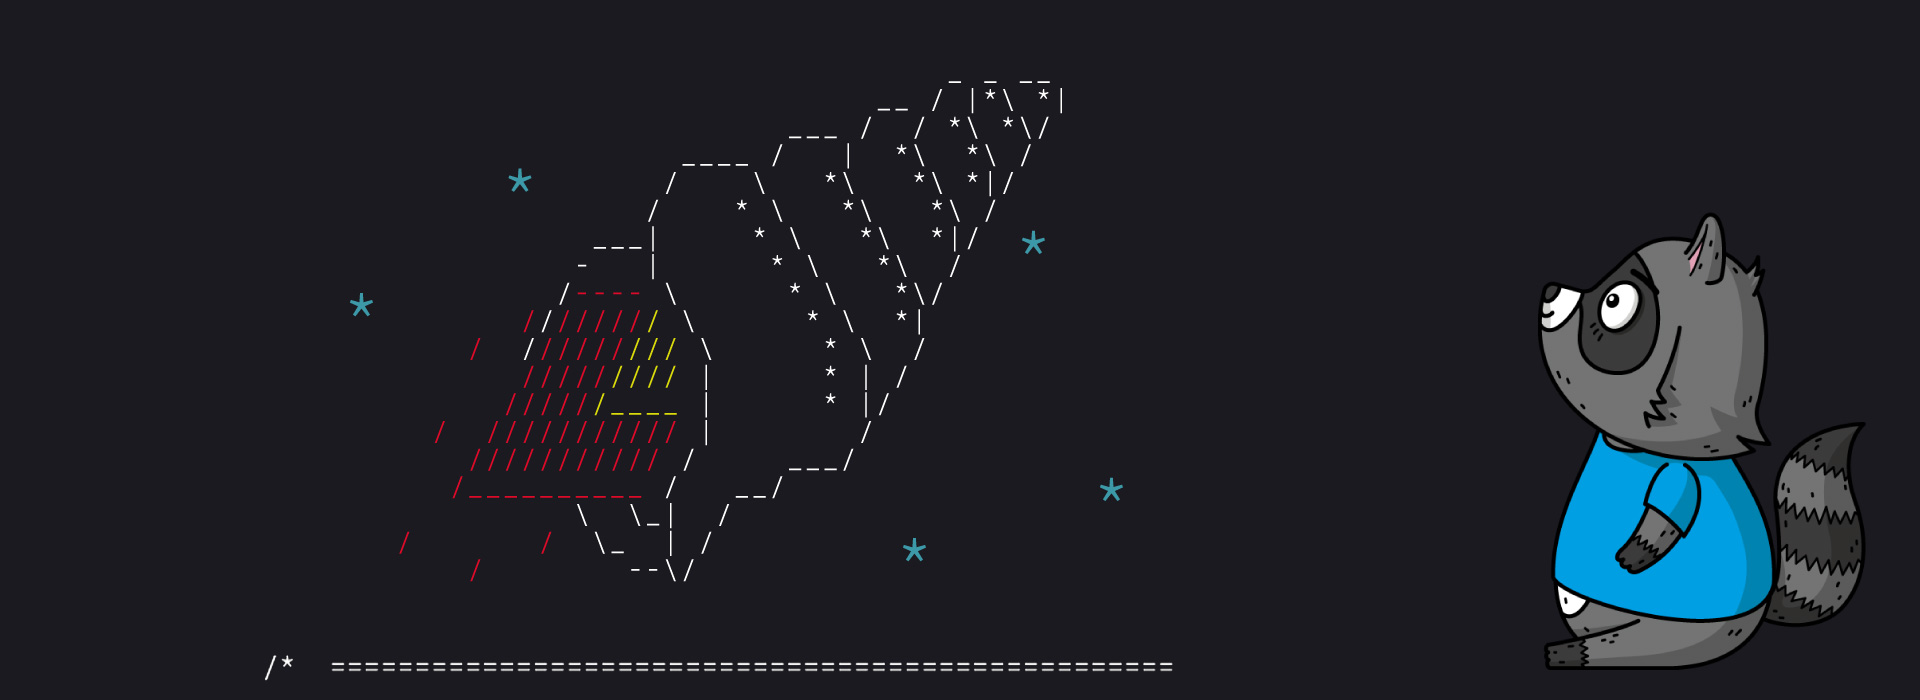 An image of a conch shell made with ASCII art, next to an illustration of Bit the Raccoon.